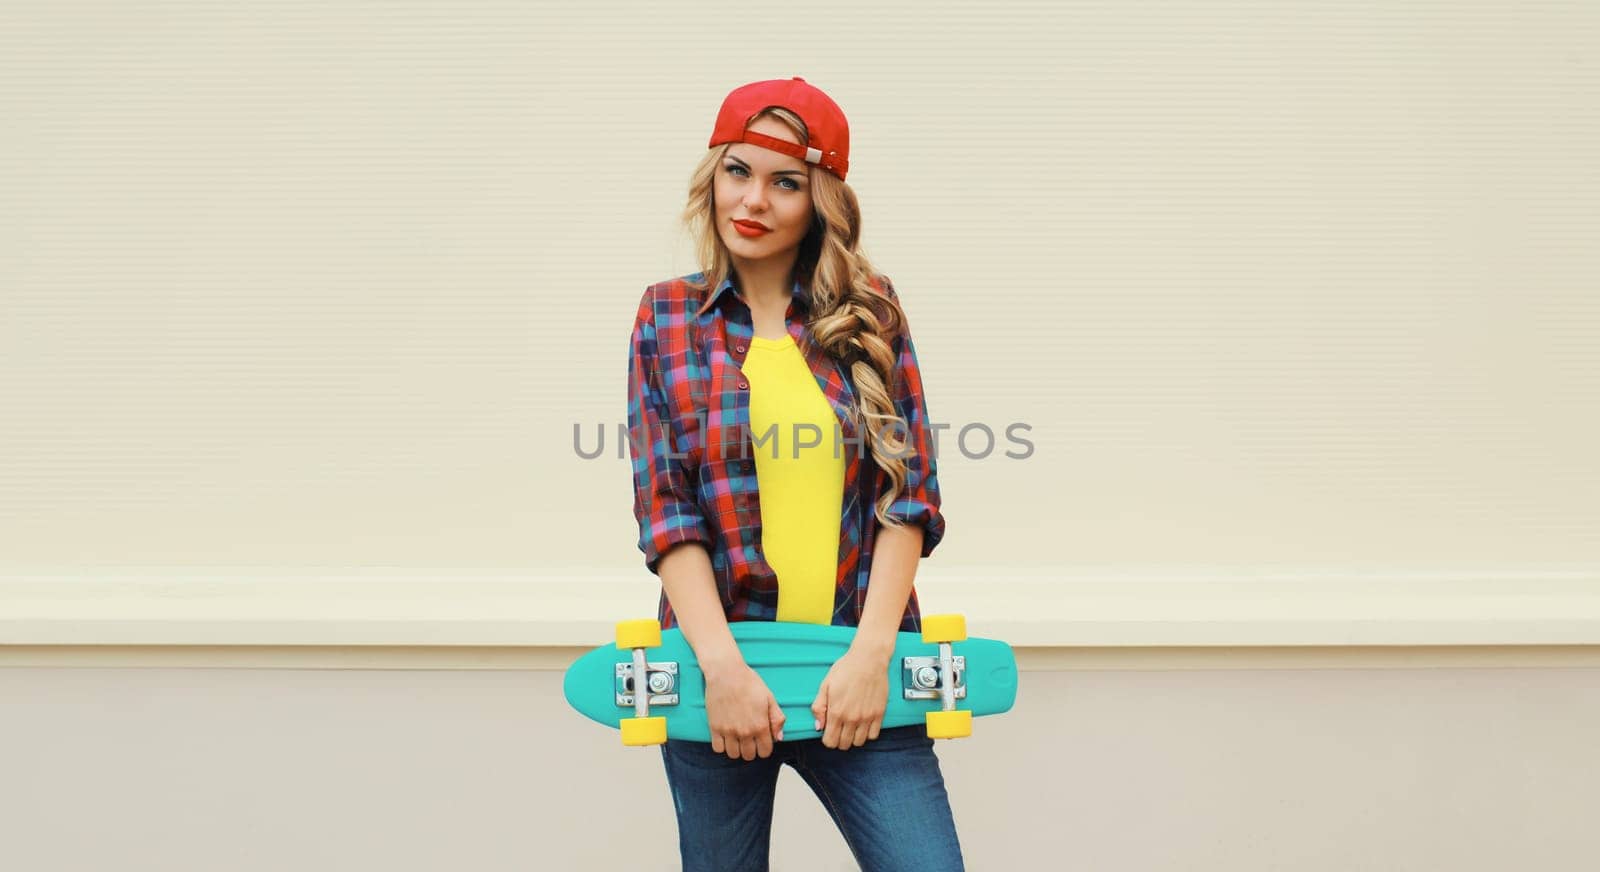 Portrait of stylish young blonde woman posing with skateboard on city street against white wall background